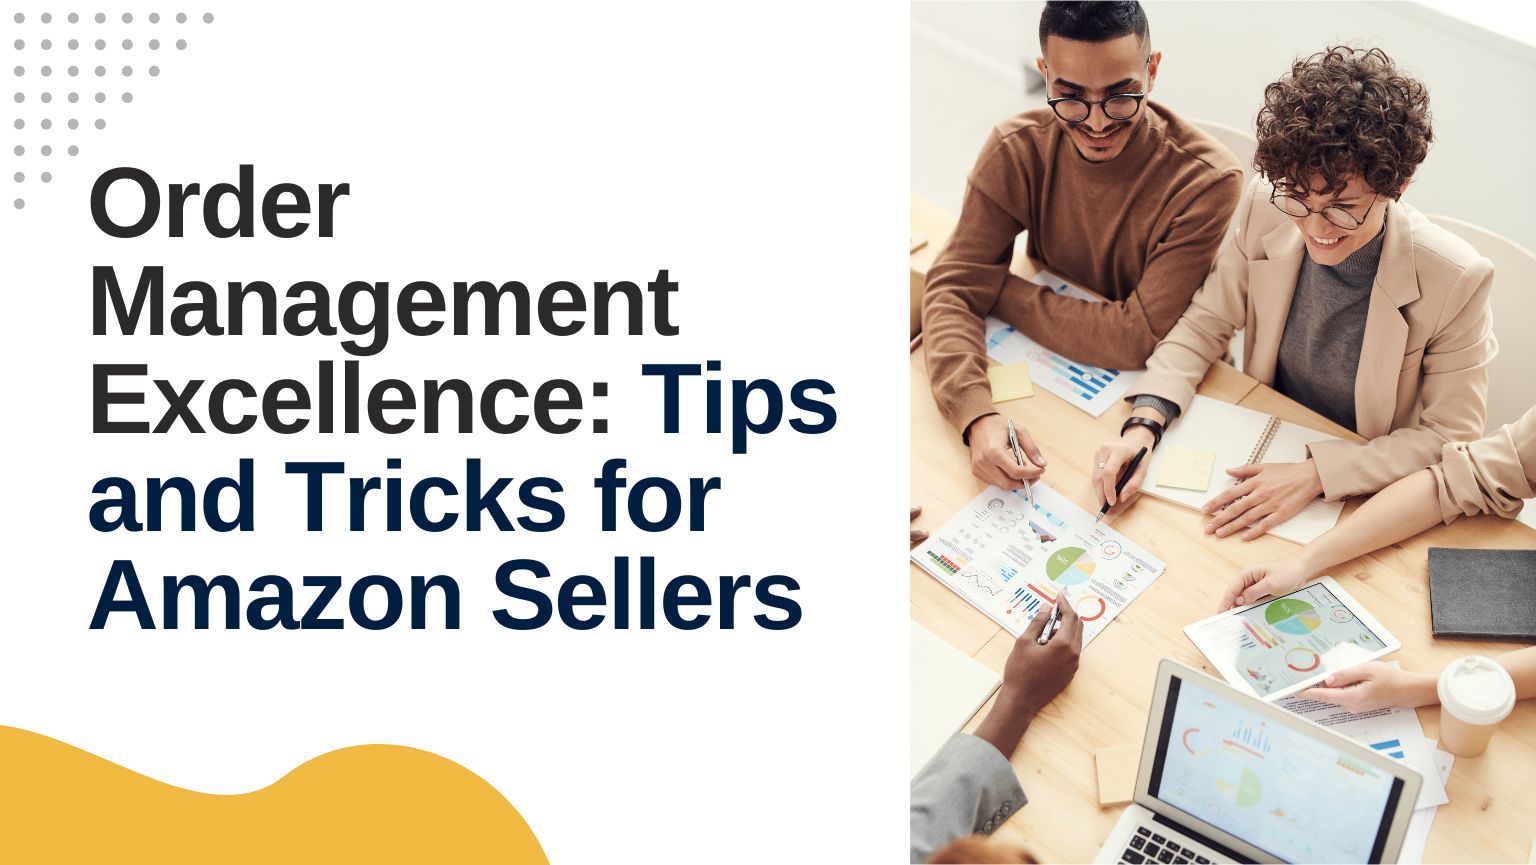 Tips and Tricks for Amazon Sellers